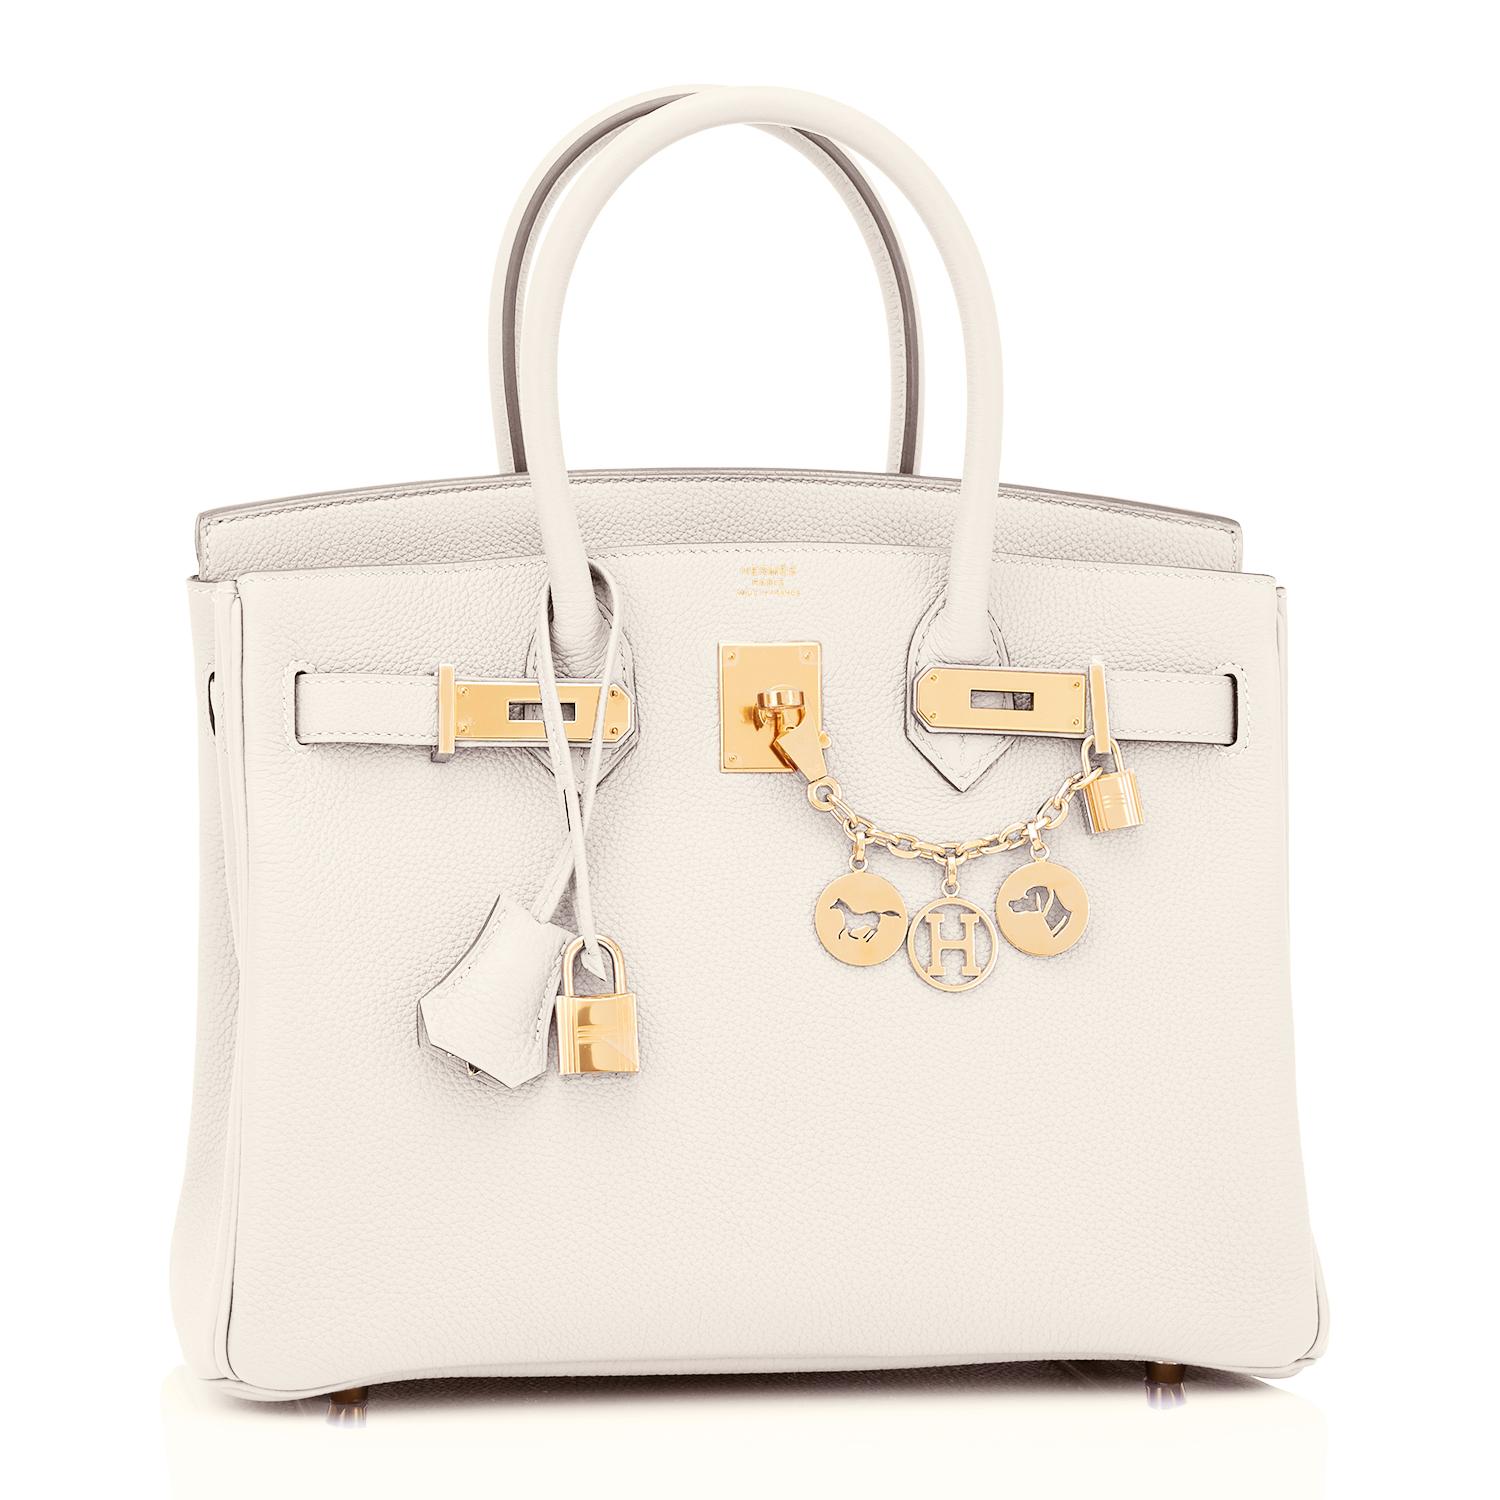 Hermes Birkin 30 Craie Togo Chalk Off White Gold Hardware Bag NEW
New or Never Used. Pristine Condition (with plastic on hardware)
Perfect gift! Comes in full set with lock, keys, clochette, sleeper, raincoat, and orange Hermes box.
Pure neutral